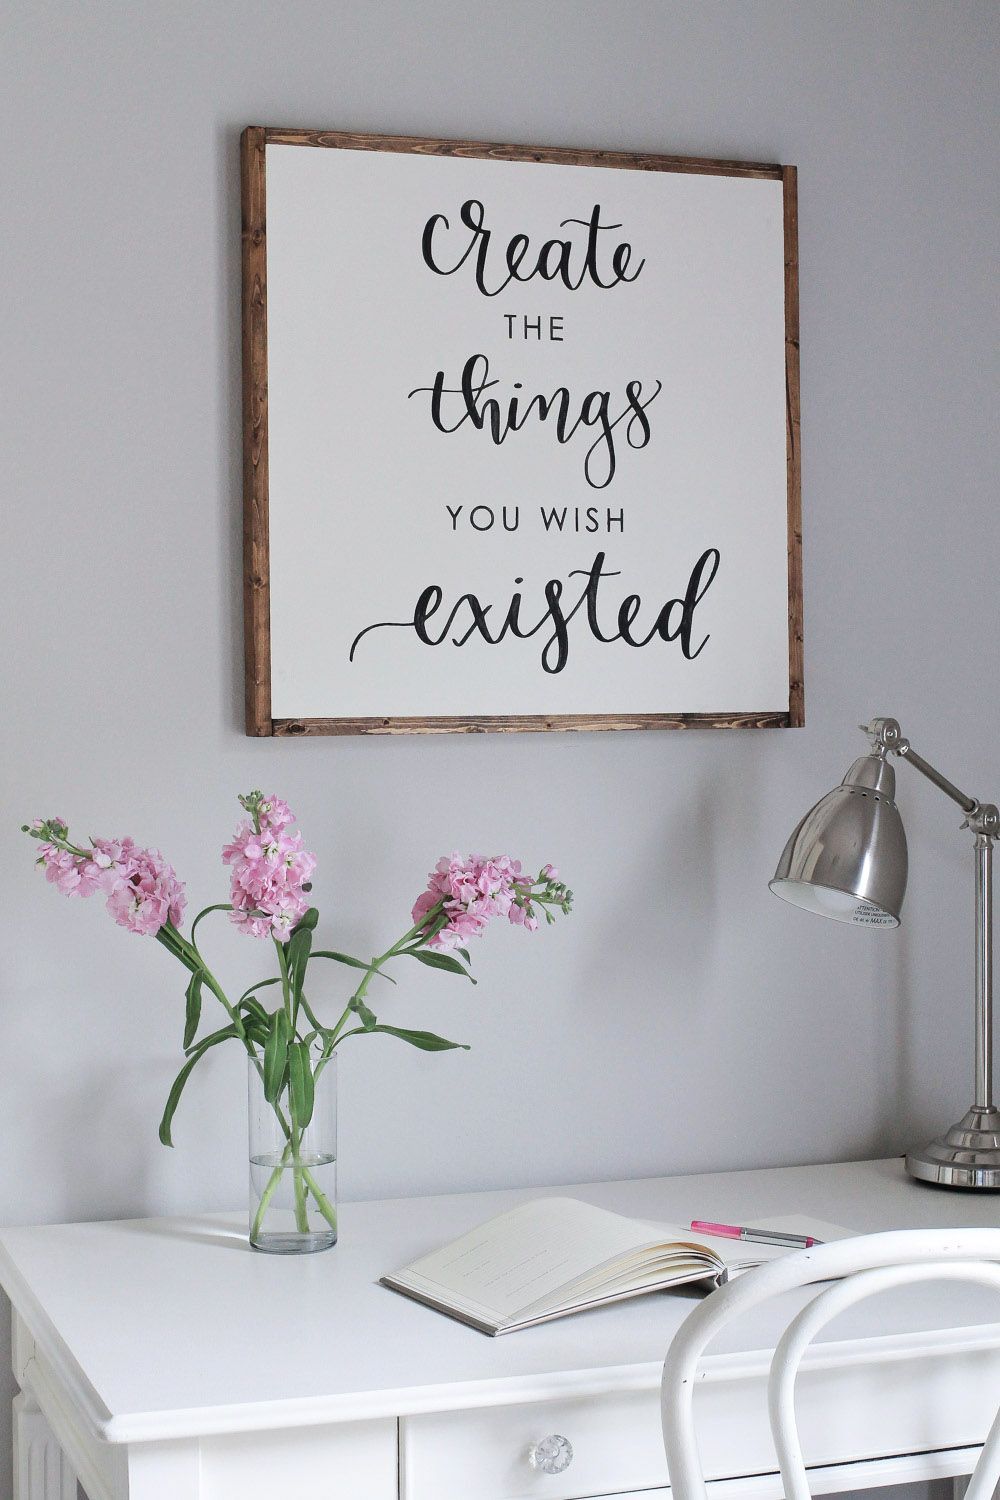 Free DIY Wood framed sign tutorial and a FREE PRINTABLE of this calligraphy quote “Create the things you wish existed”. Farmhouse